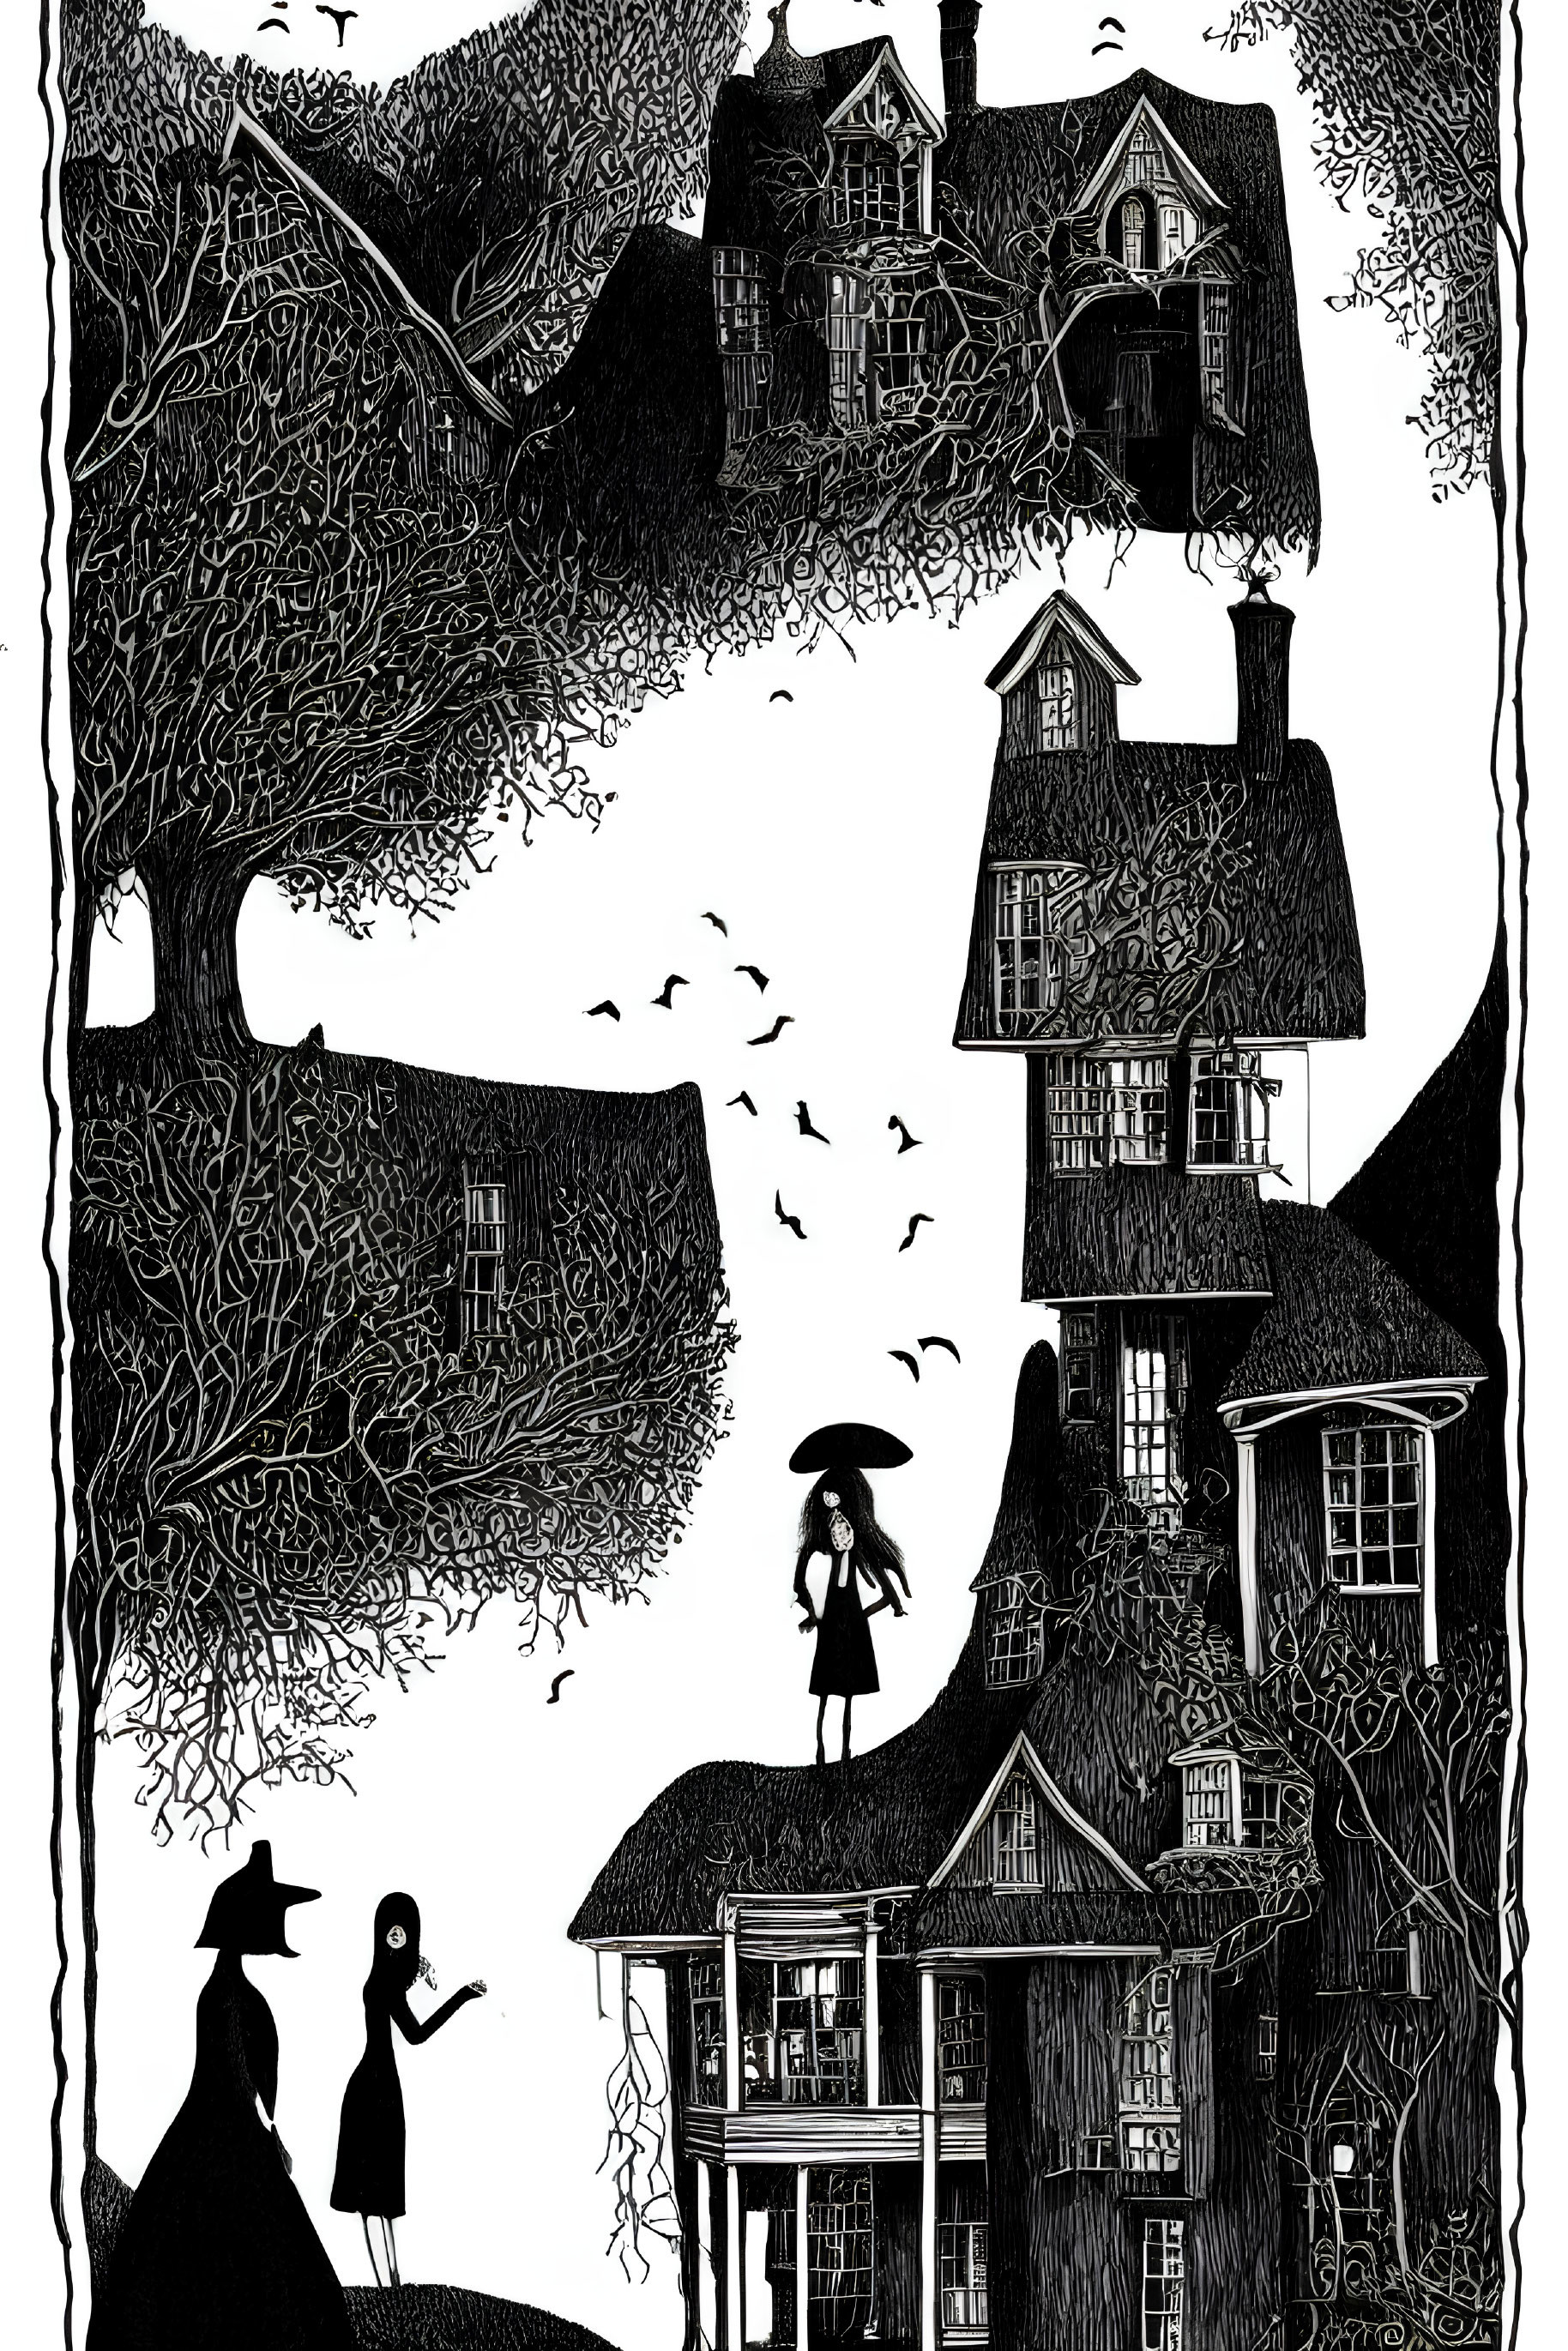 Detailed black and white drawing of whimsical houses, trees, people, and birds.